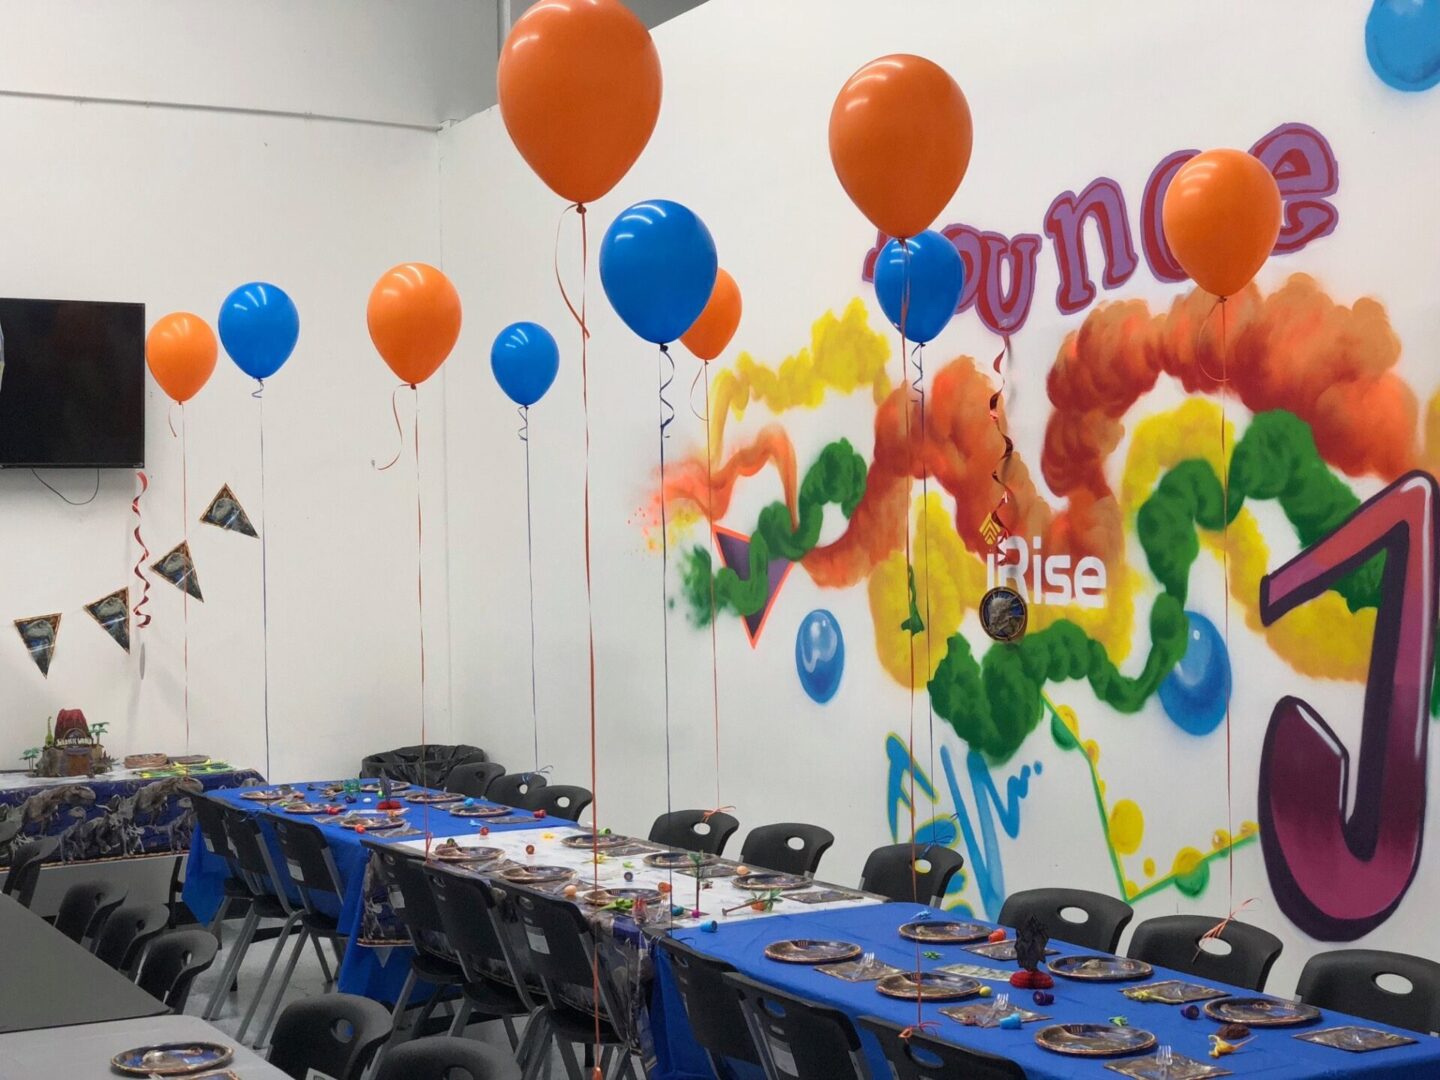 A table with chairs and balloons in the middle of it